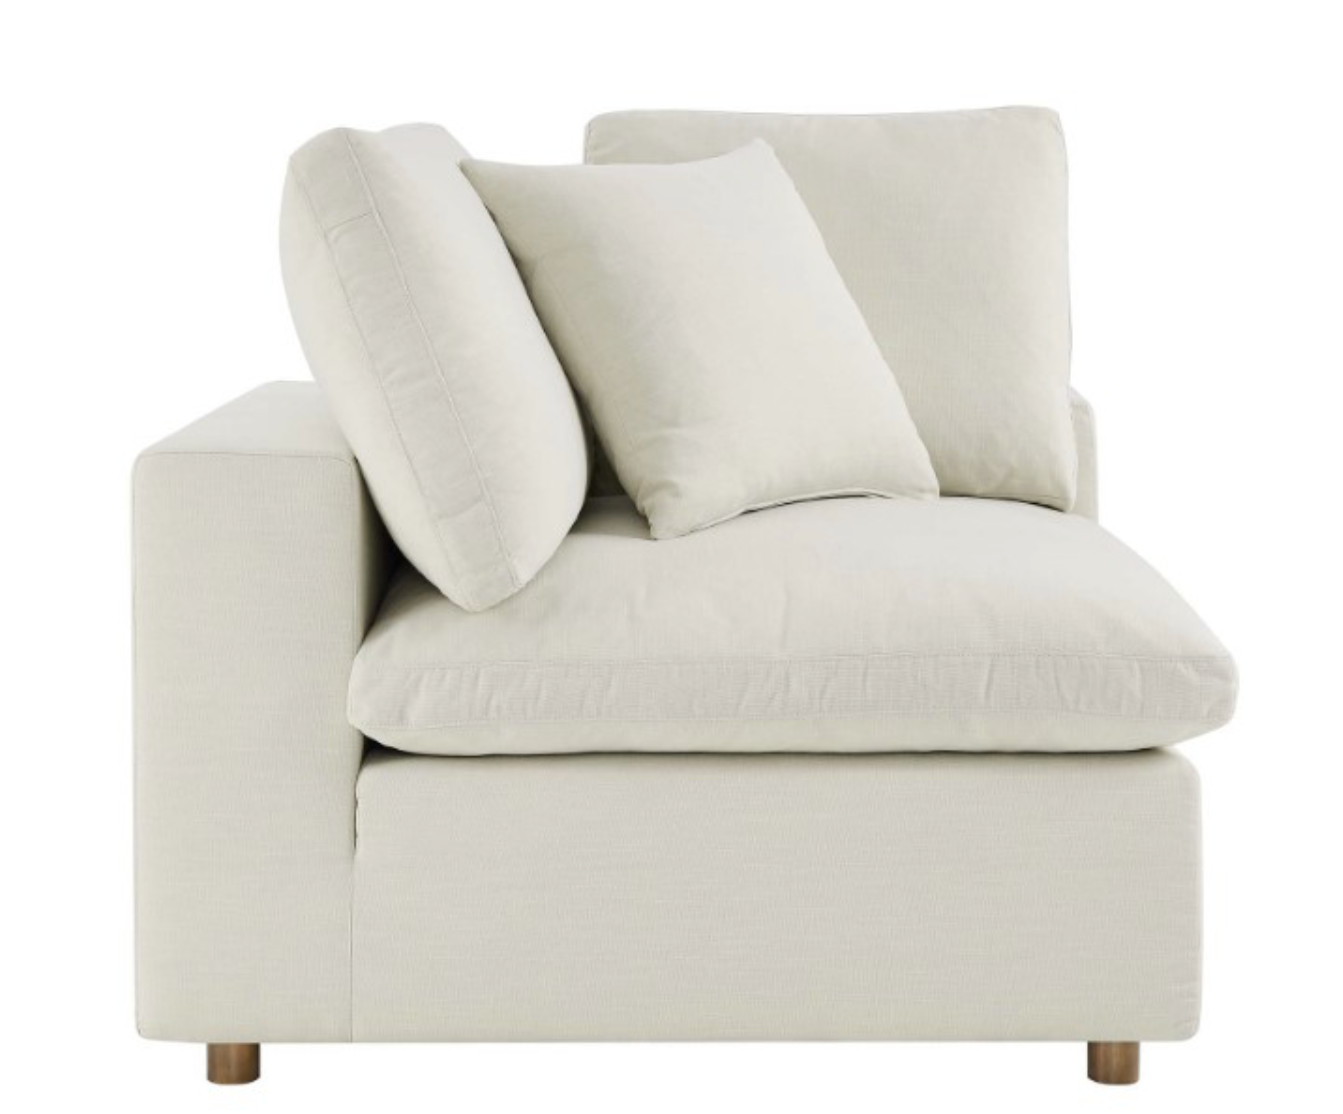 The Mist 4 PC Luxe Linen Feather Cloud Sectional